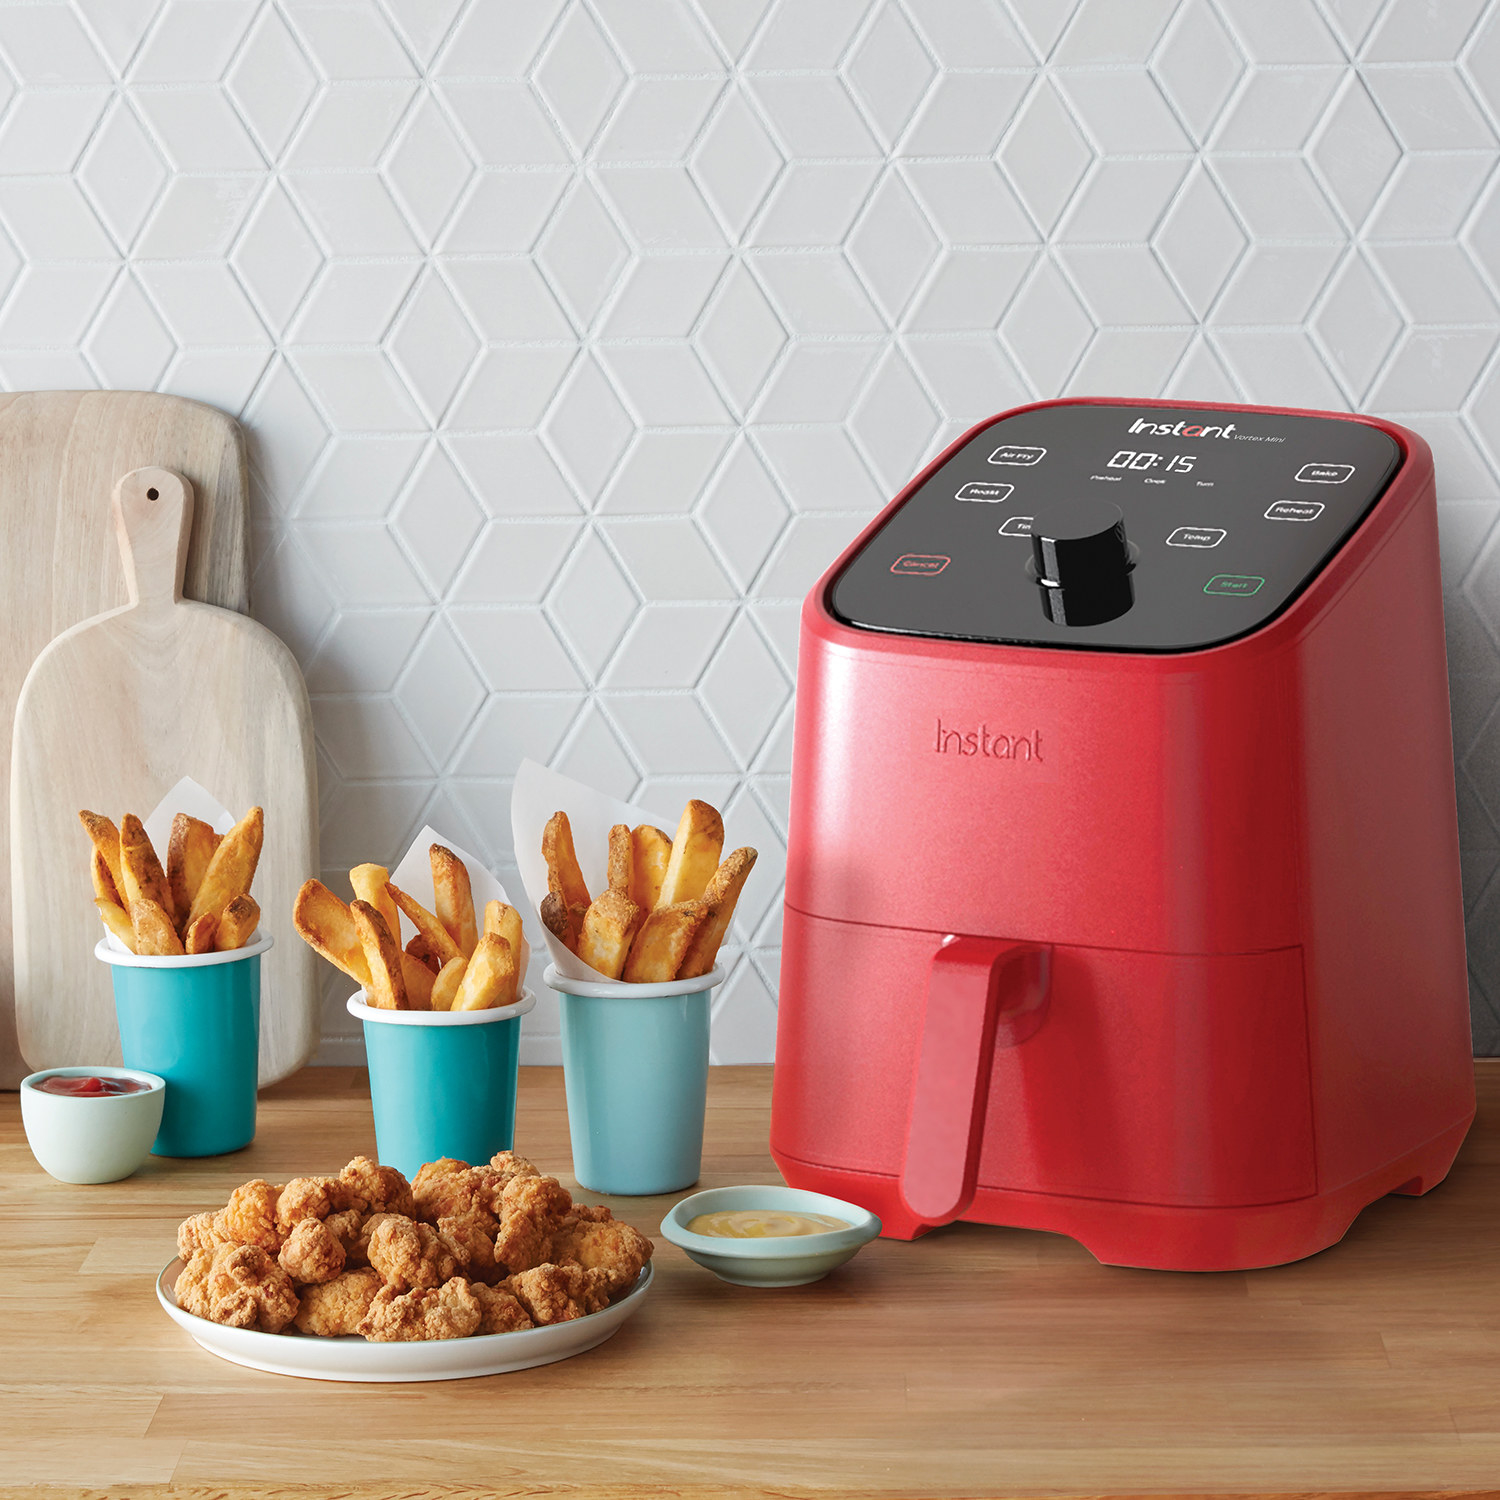 The red air fryer next to fries and chicken nuggets